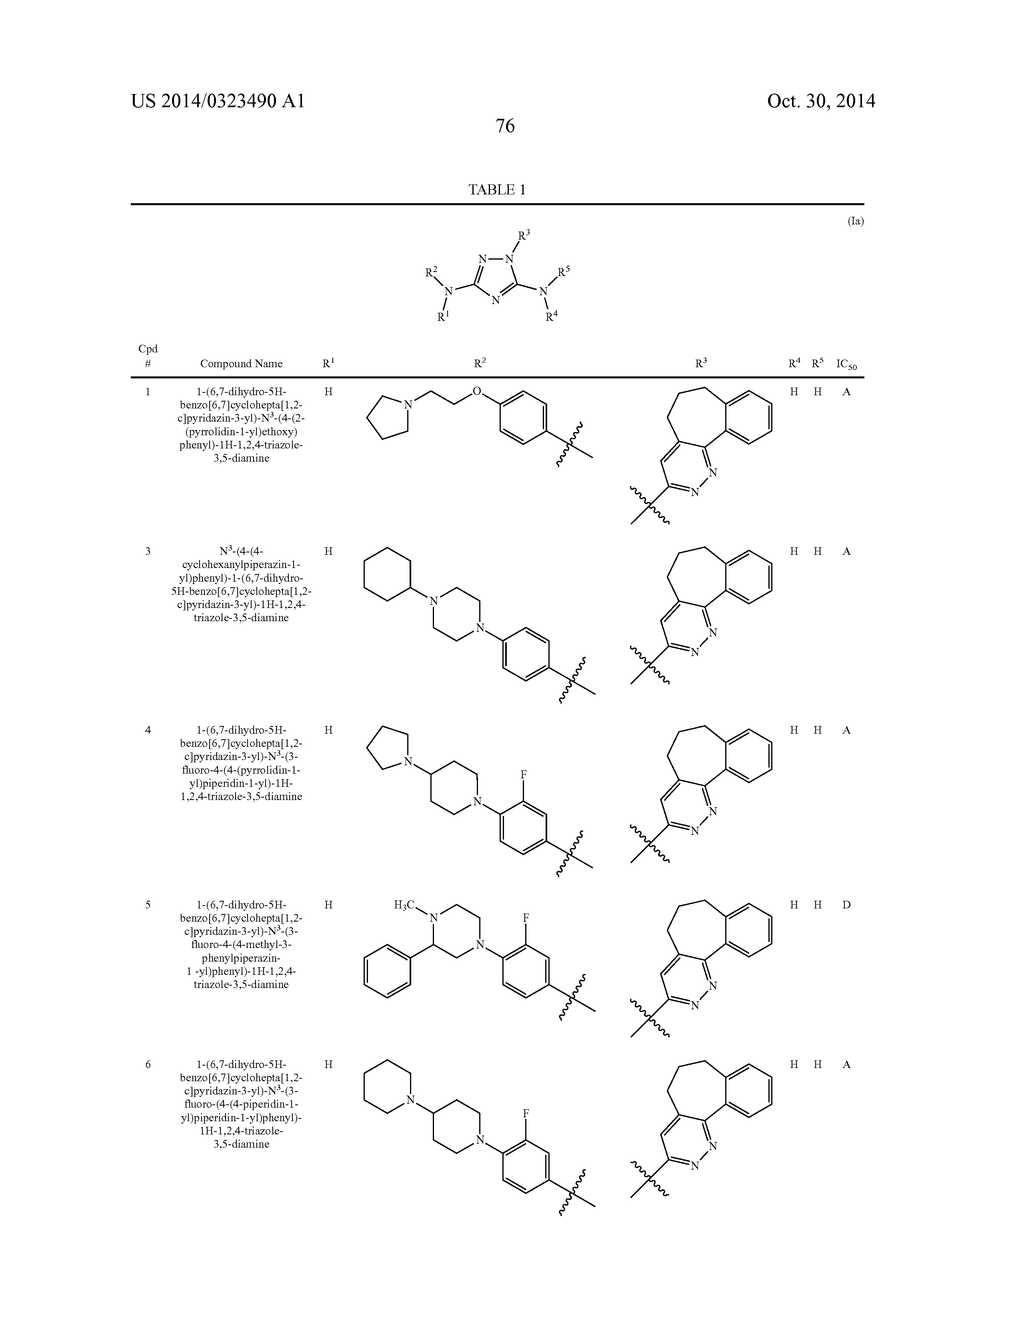 POLYCYCLIC HETEROARYL SUBSTITUTED TRIAZOLES USEFUL AS AXL INHIBITORS - diagram, schematic, and image 77